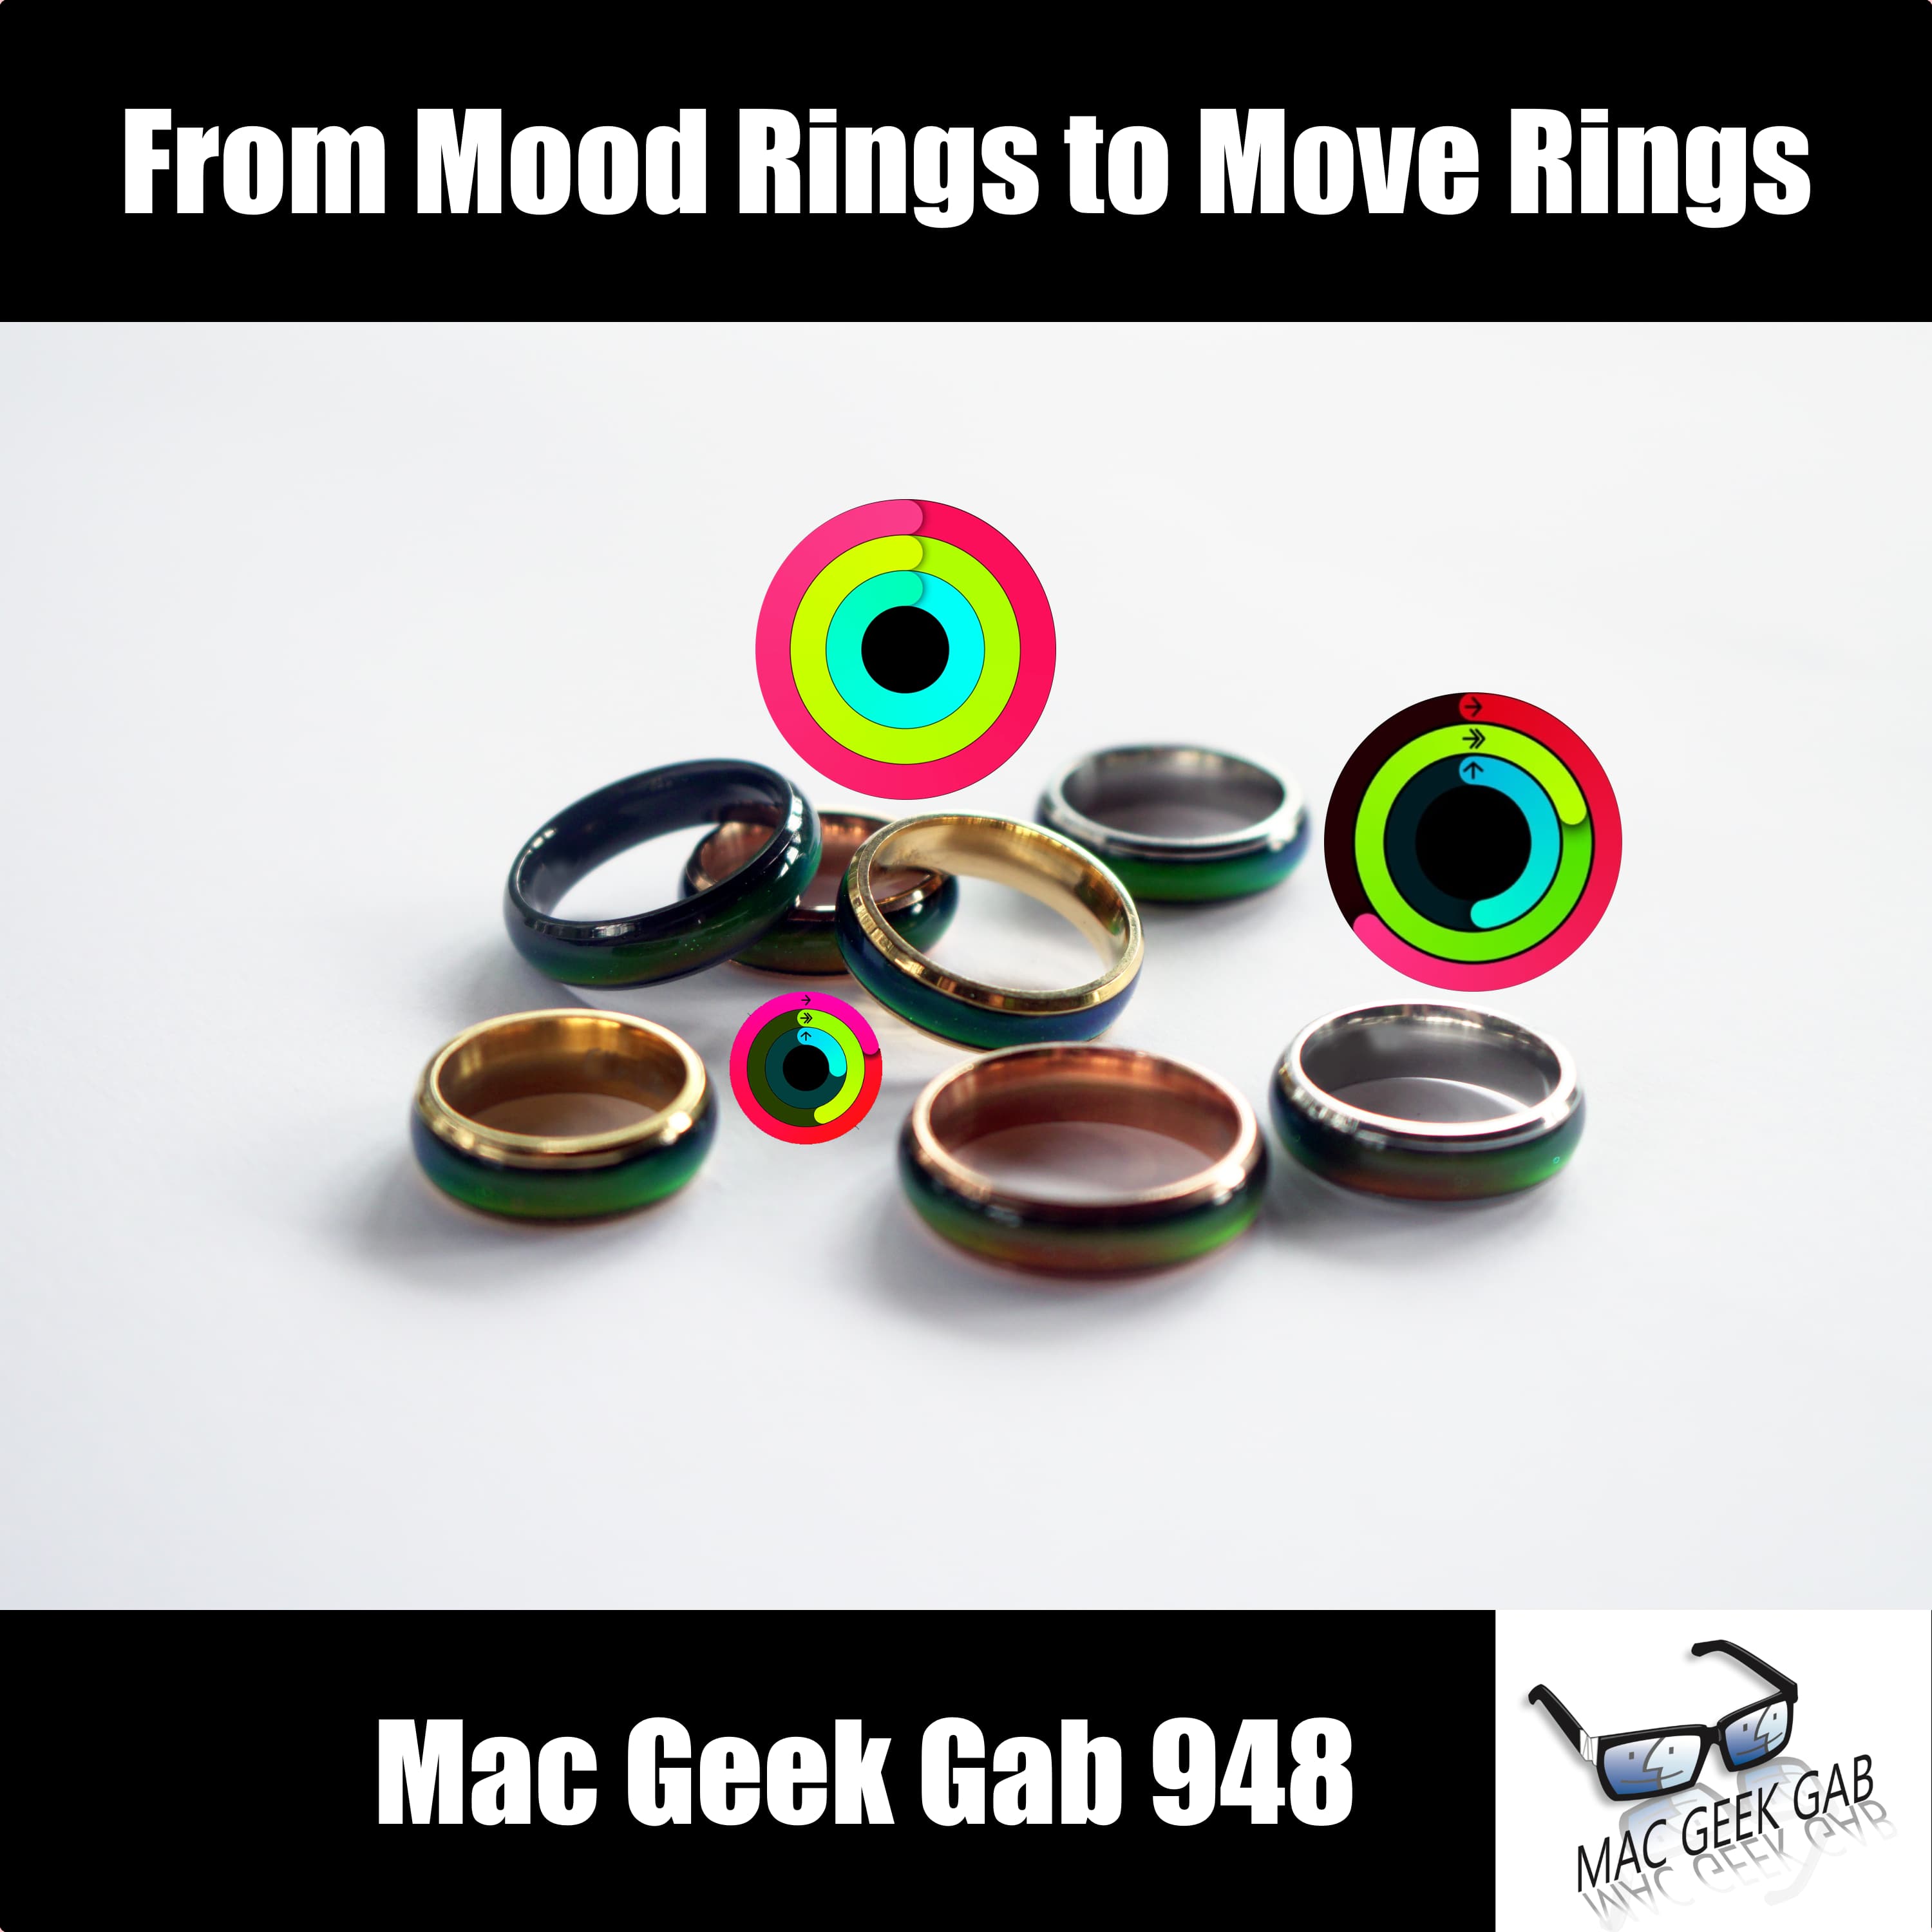 From Mood Rings to Move Rings